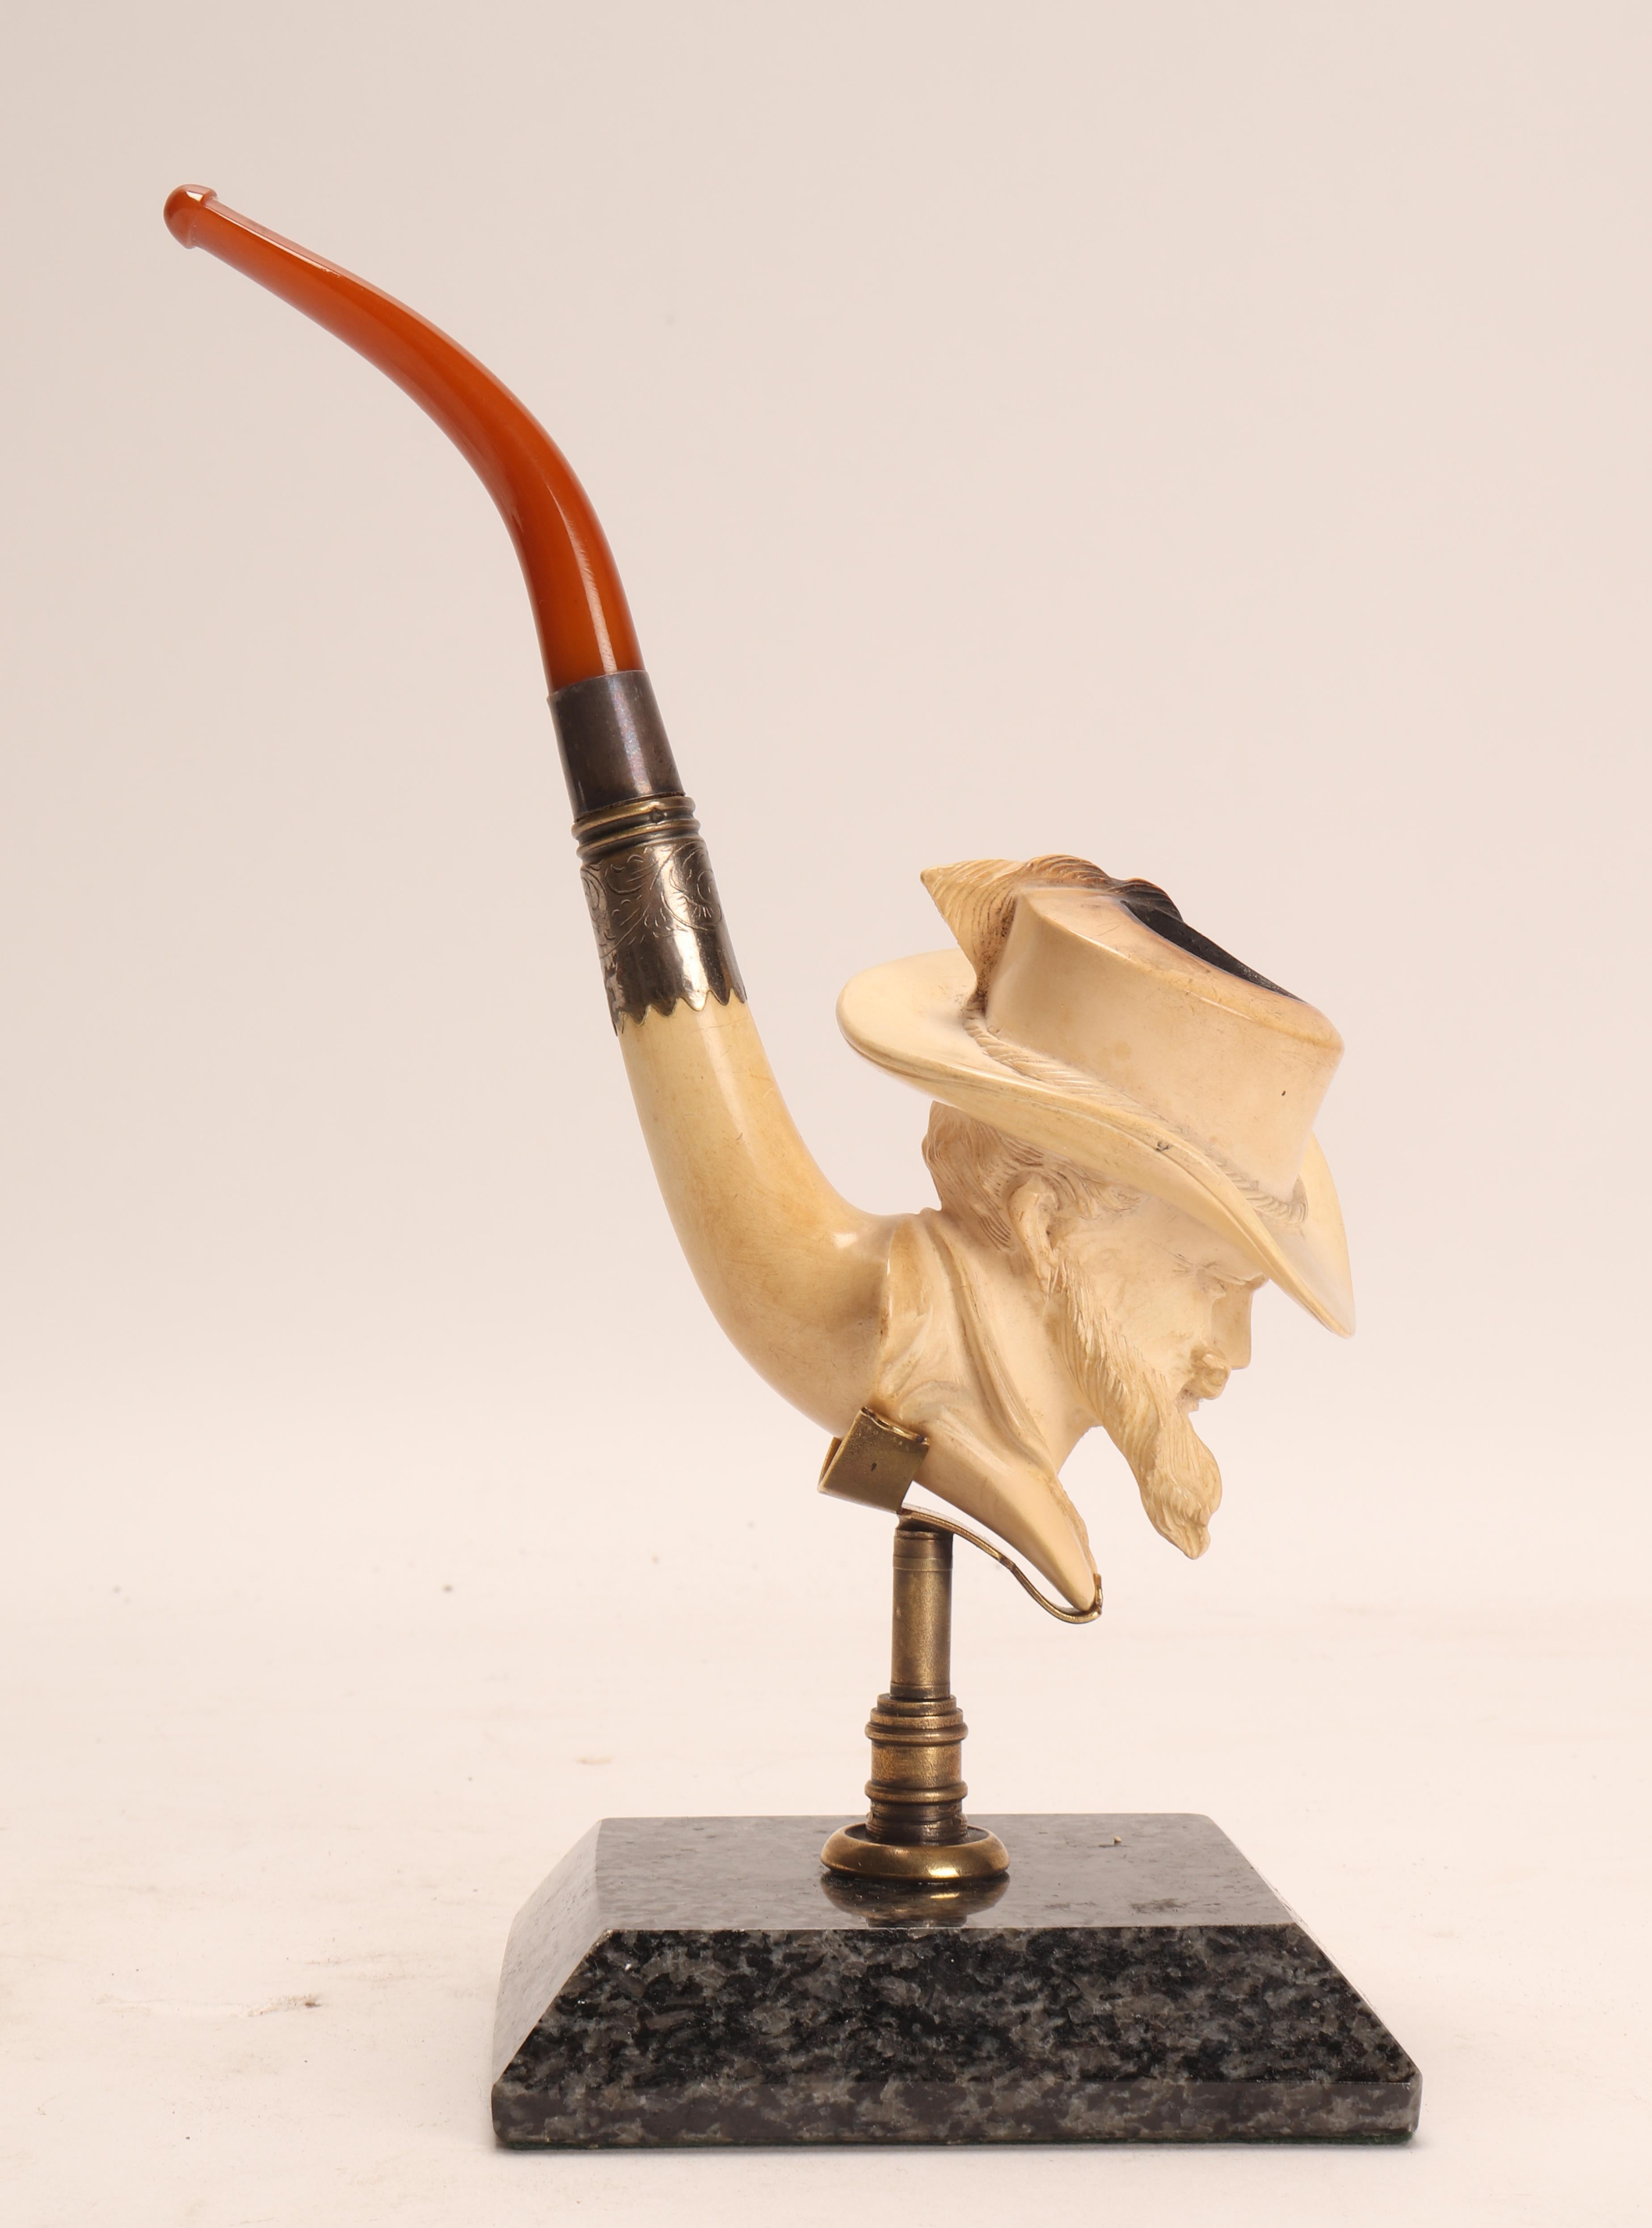 19th Century Meershaum Pipe with the Head of General Custer, Vienna, 1880